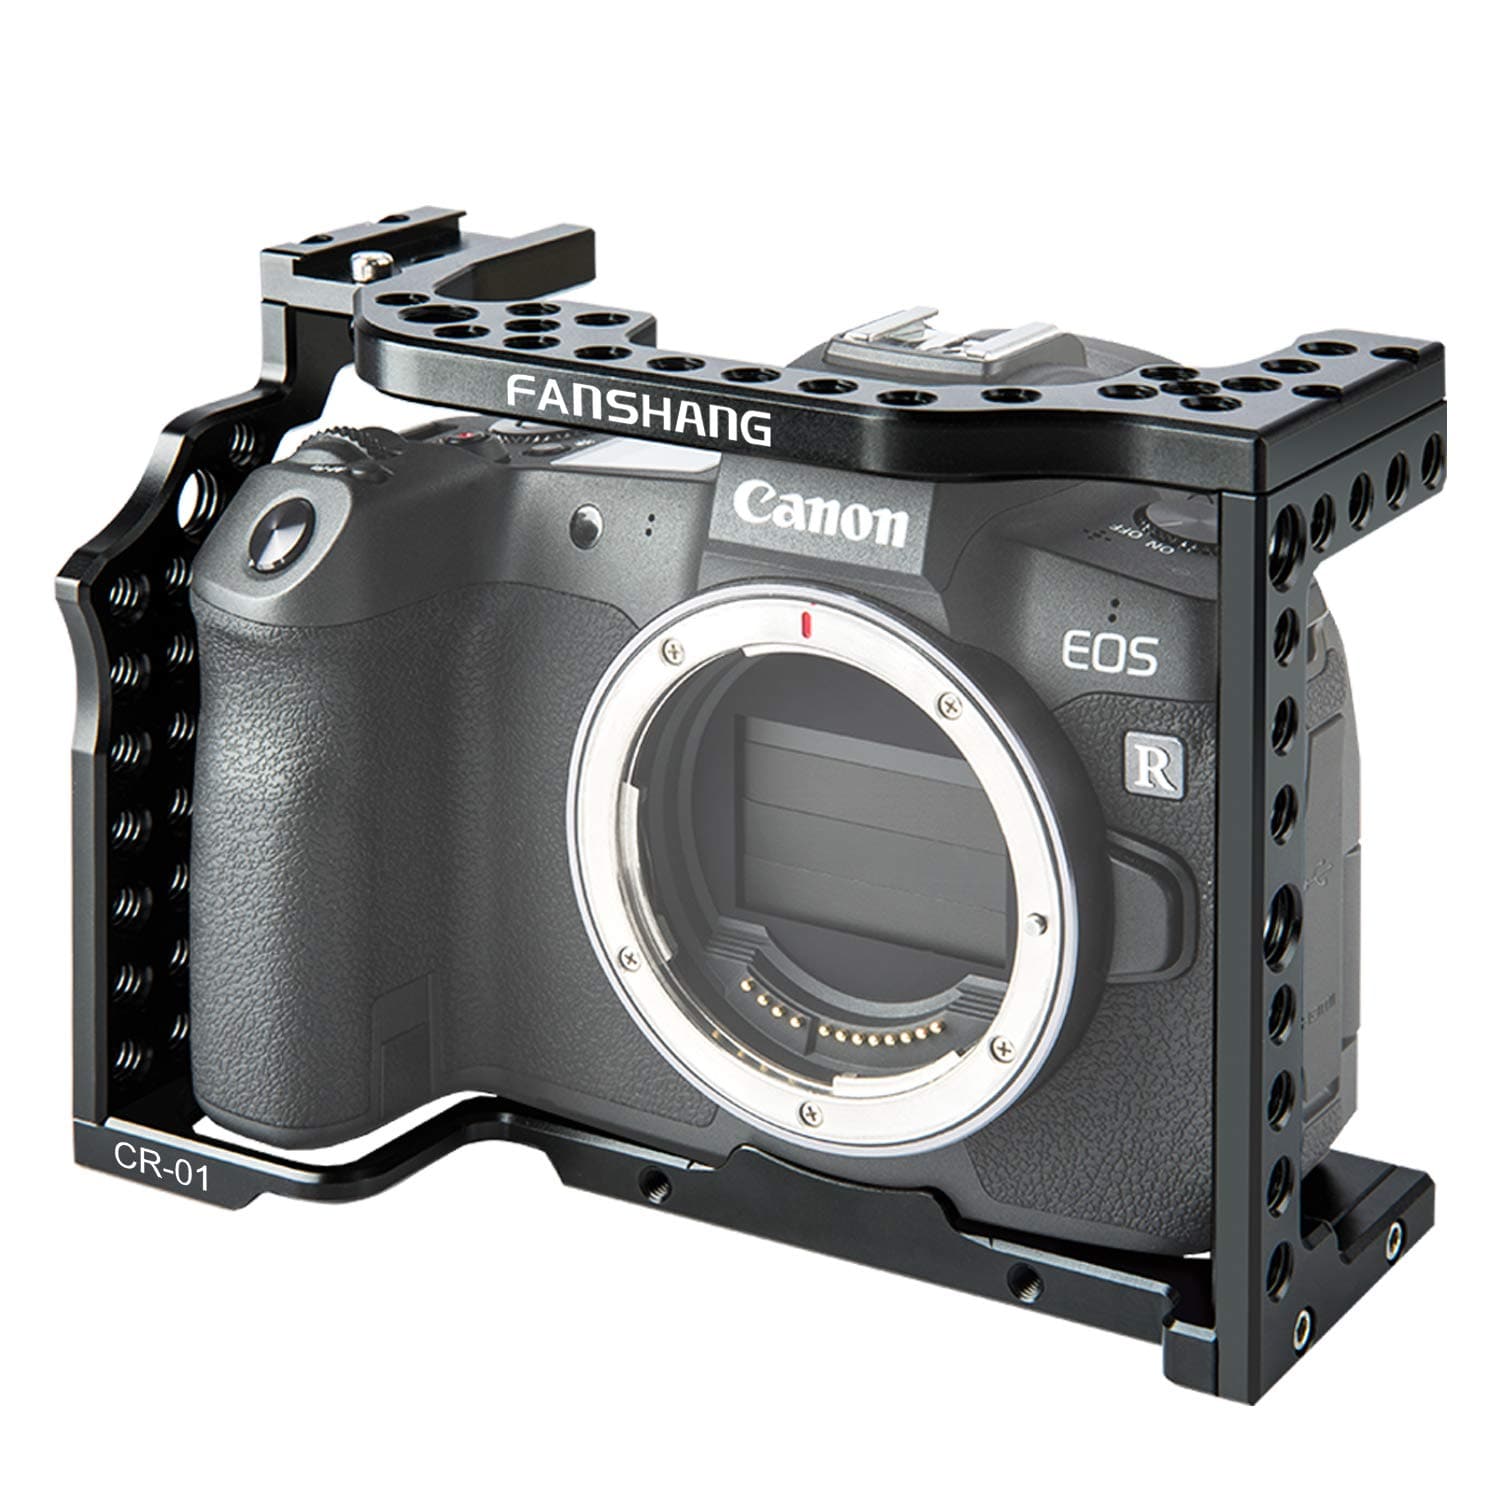 Viltrox FANSHANG CR-01 DSLR Camera Cage for Canon EOS R with 1/4" 3/8" Mounting Points